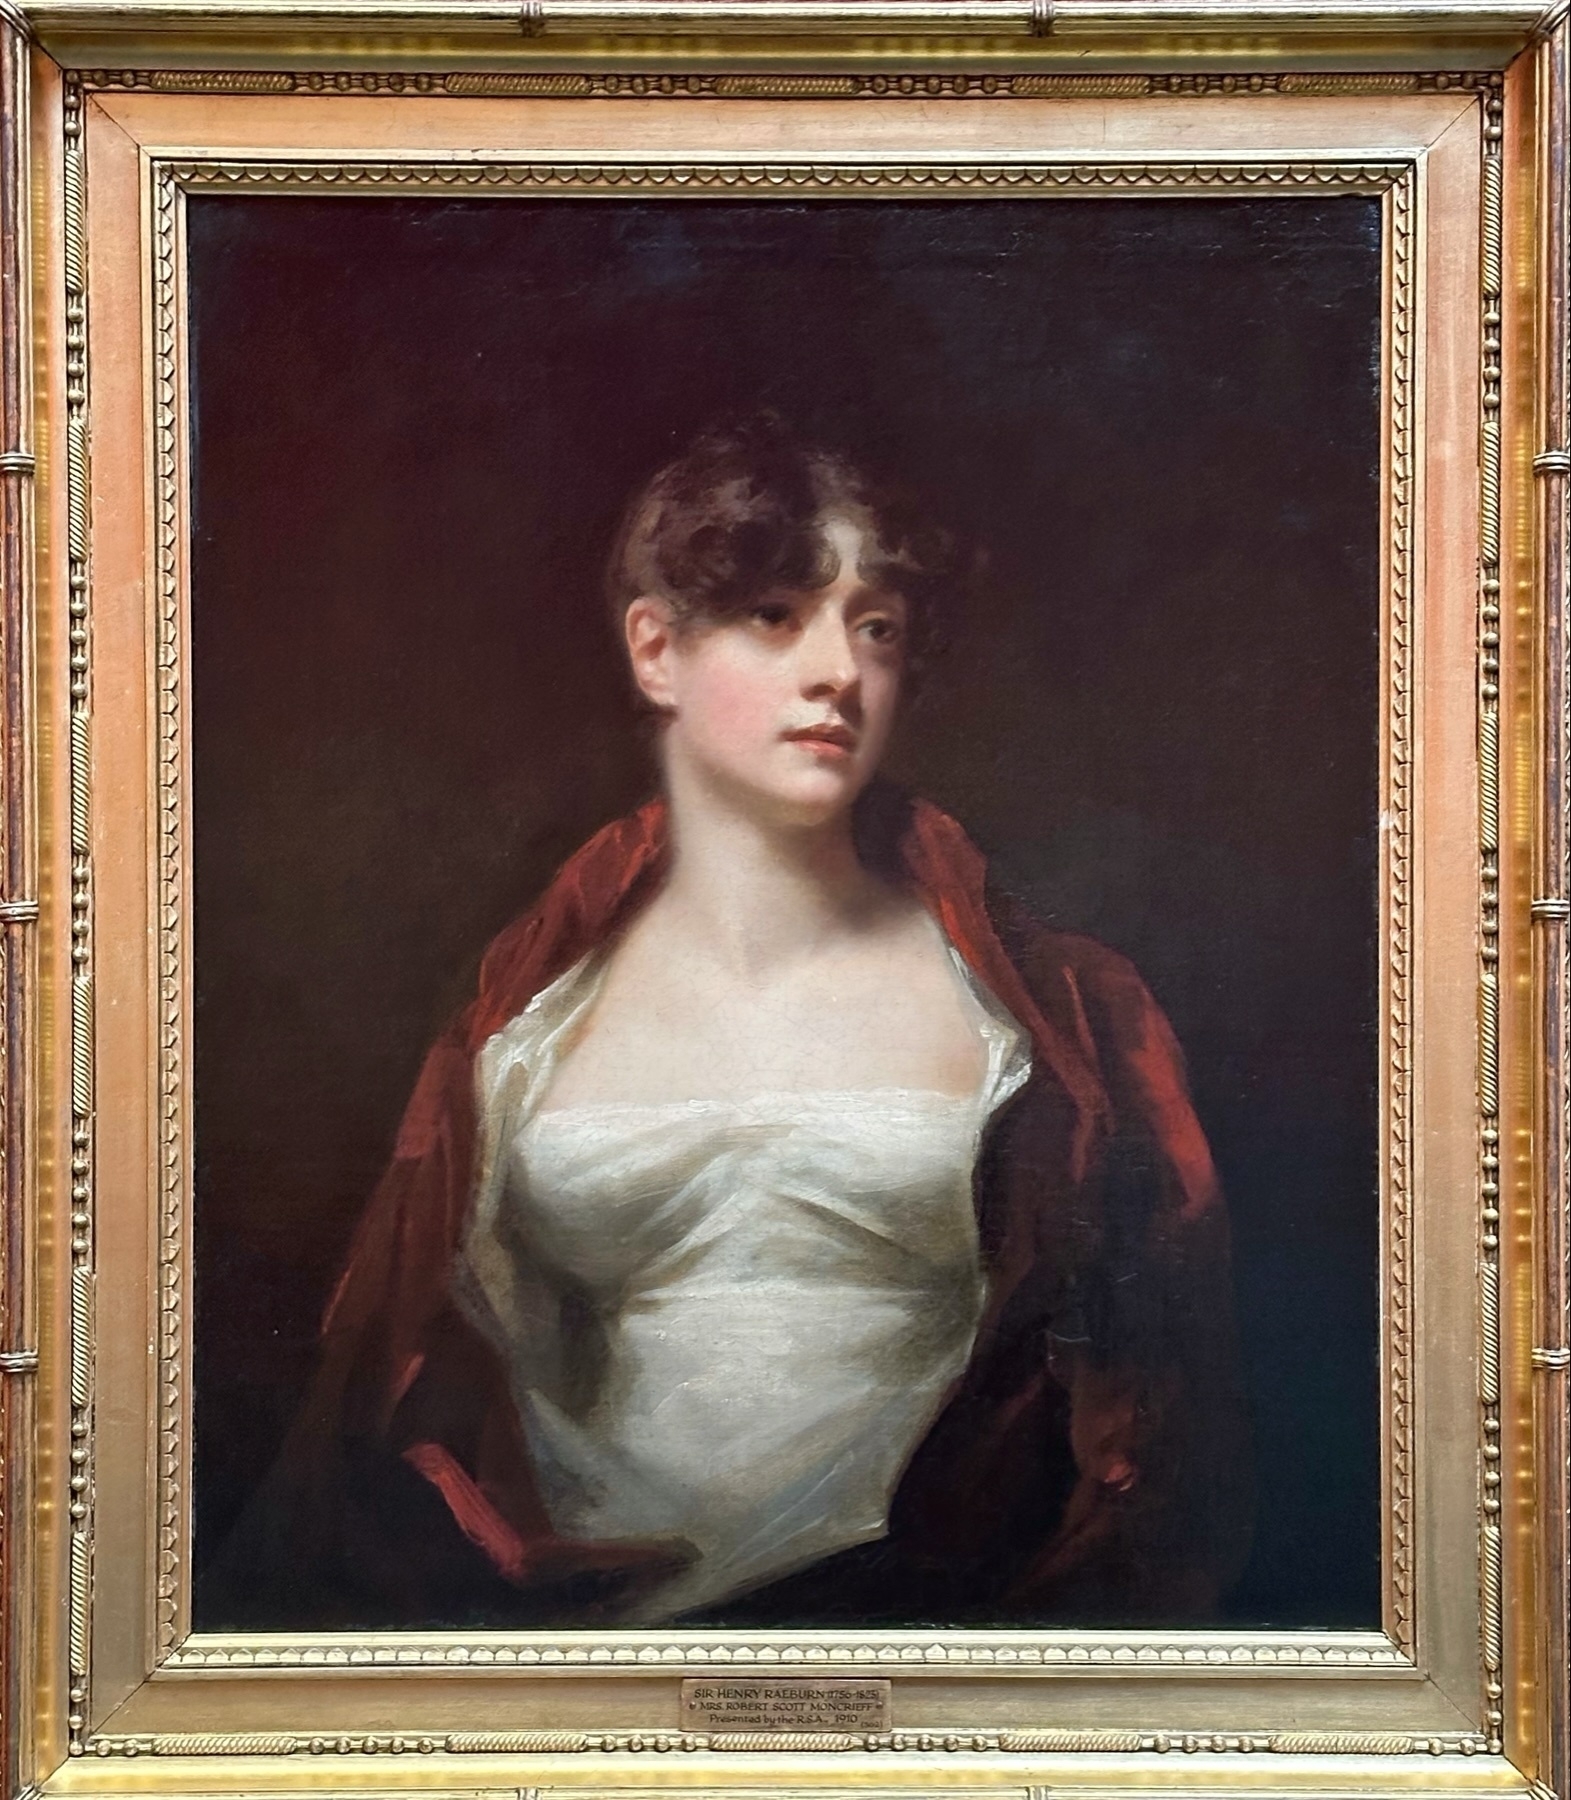 Oil painting of a young woman with dark hair wearing a white dress and a red draped shawl, set in an ornate gold frame. The woman is gazing off to the side with a soft expression.